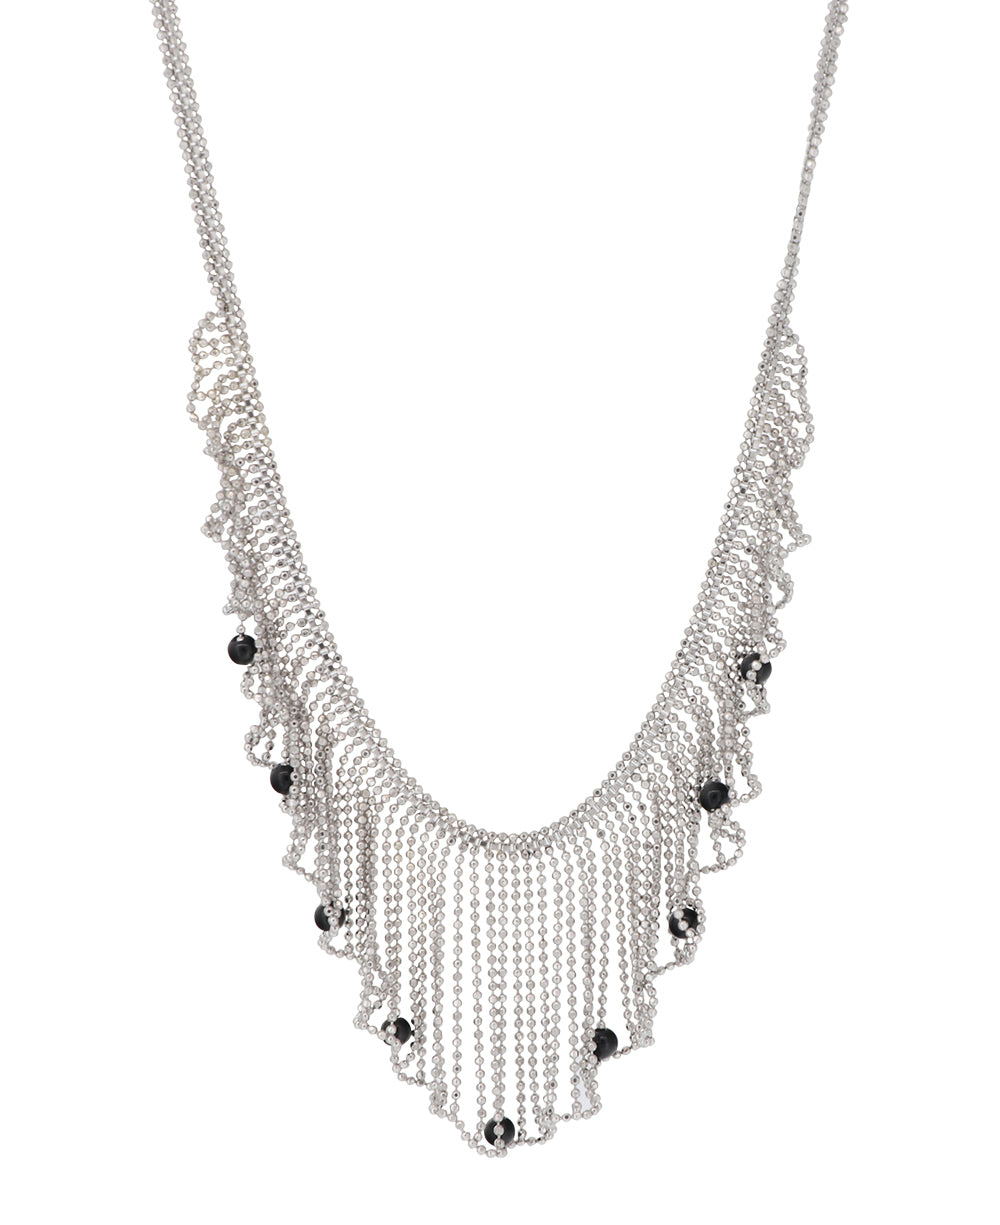 Elegant rhodium-plated Hill-Tribe silver necklace with black spinel bead embellishments